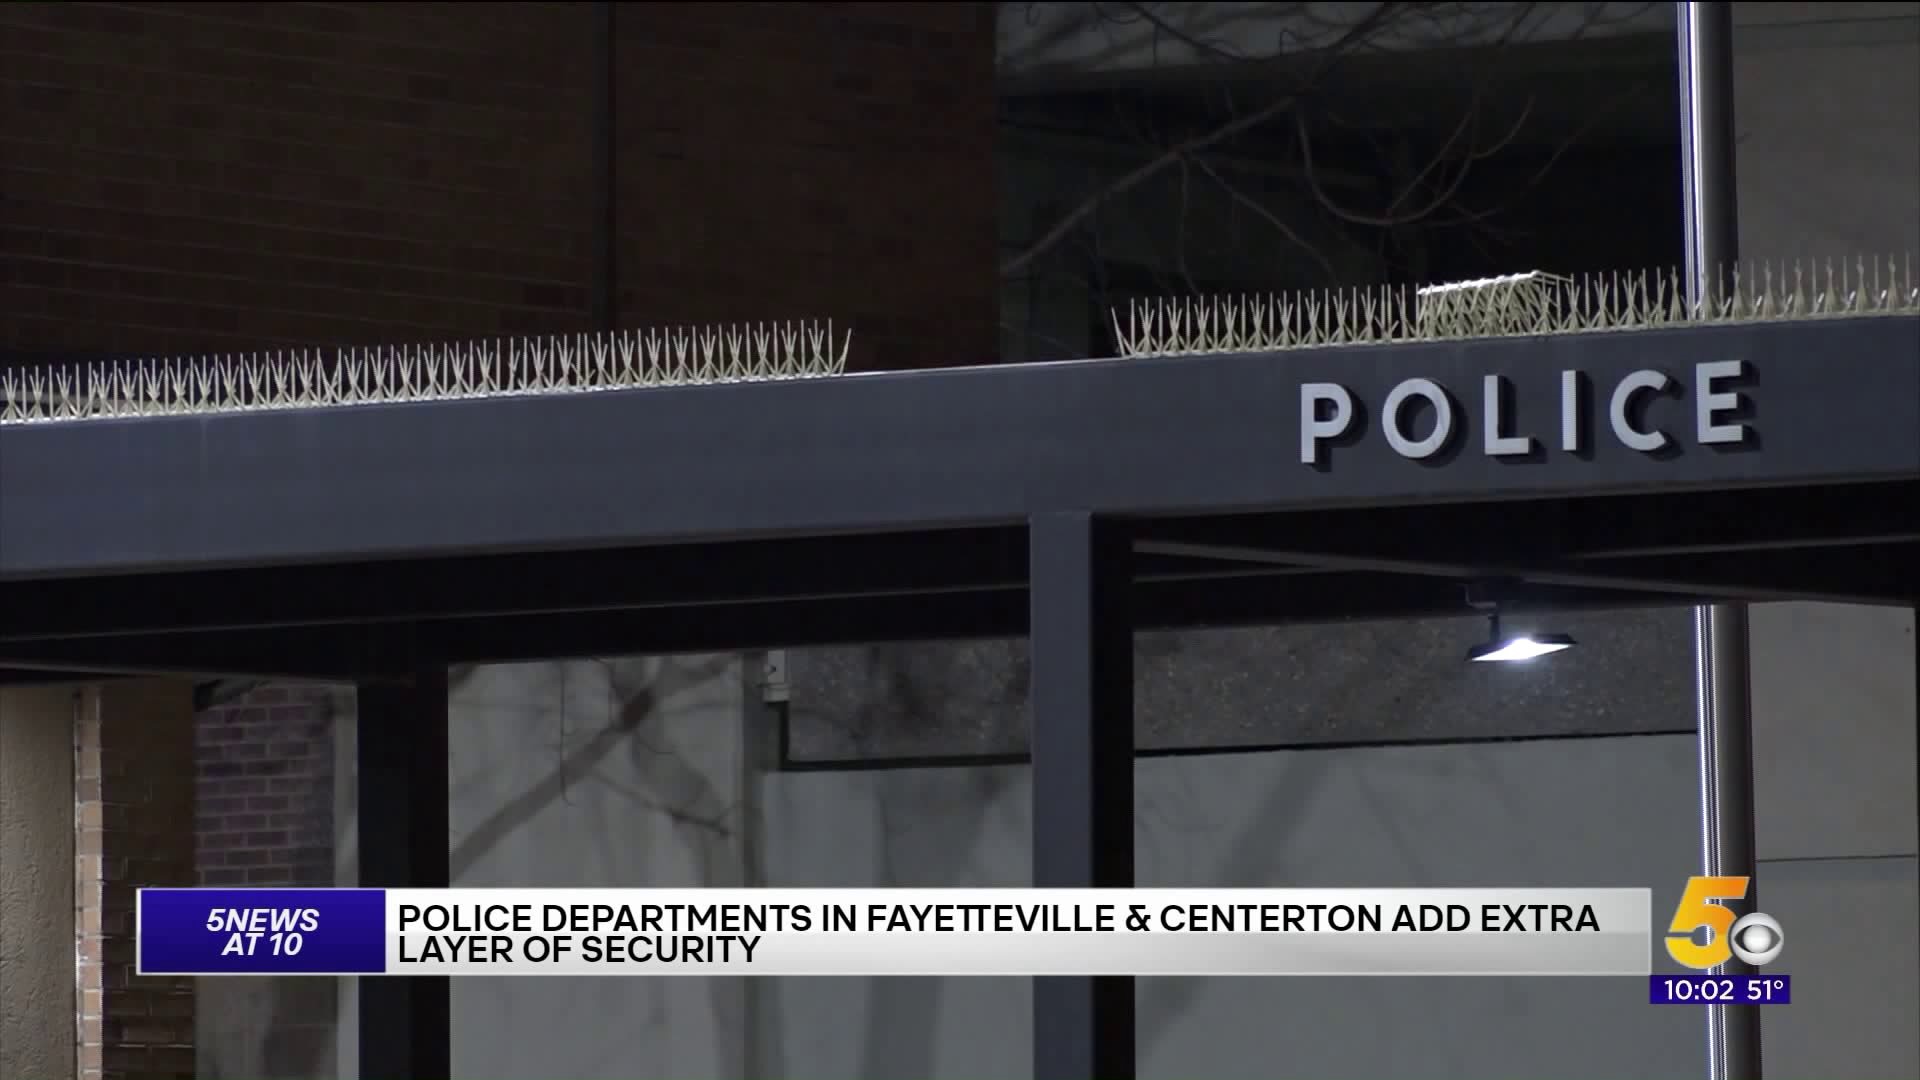 Local Police Departments Add New Security Features For Officers